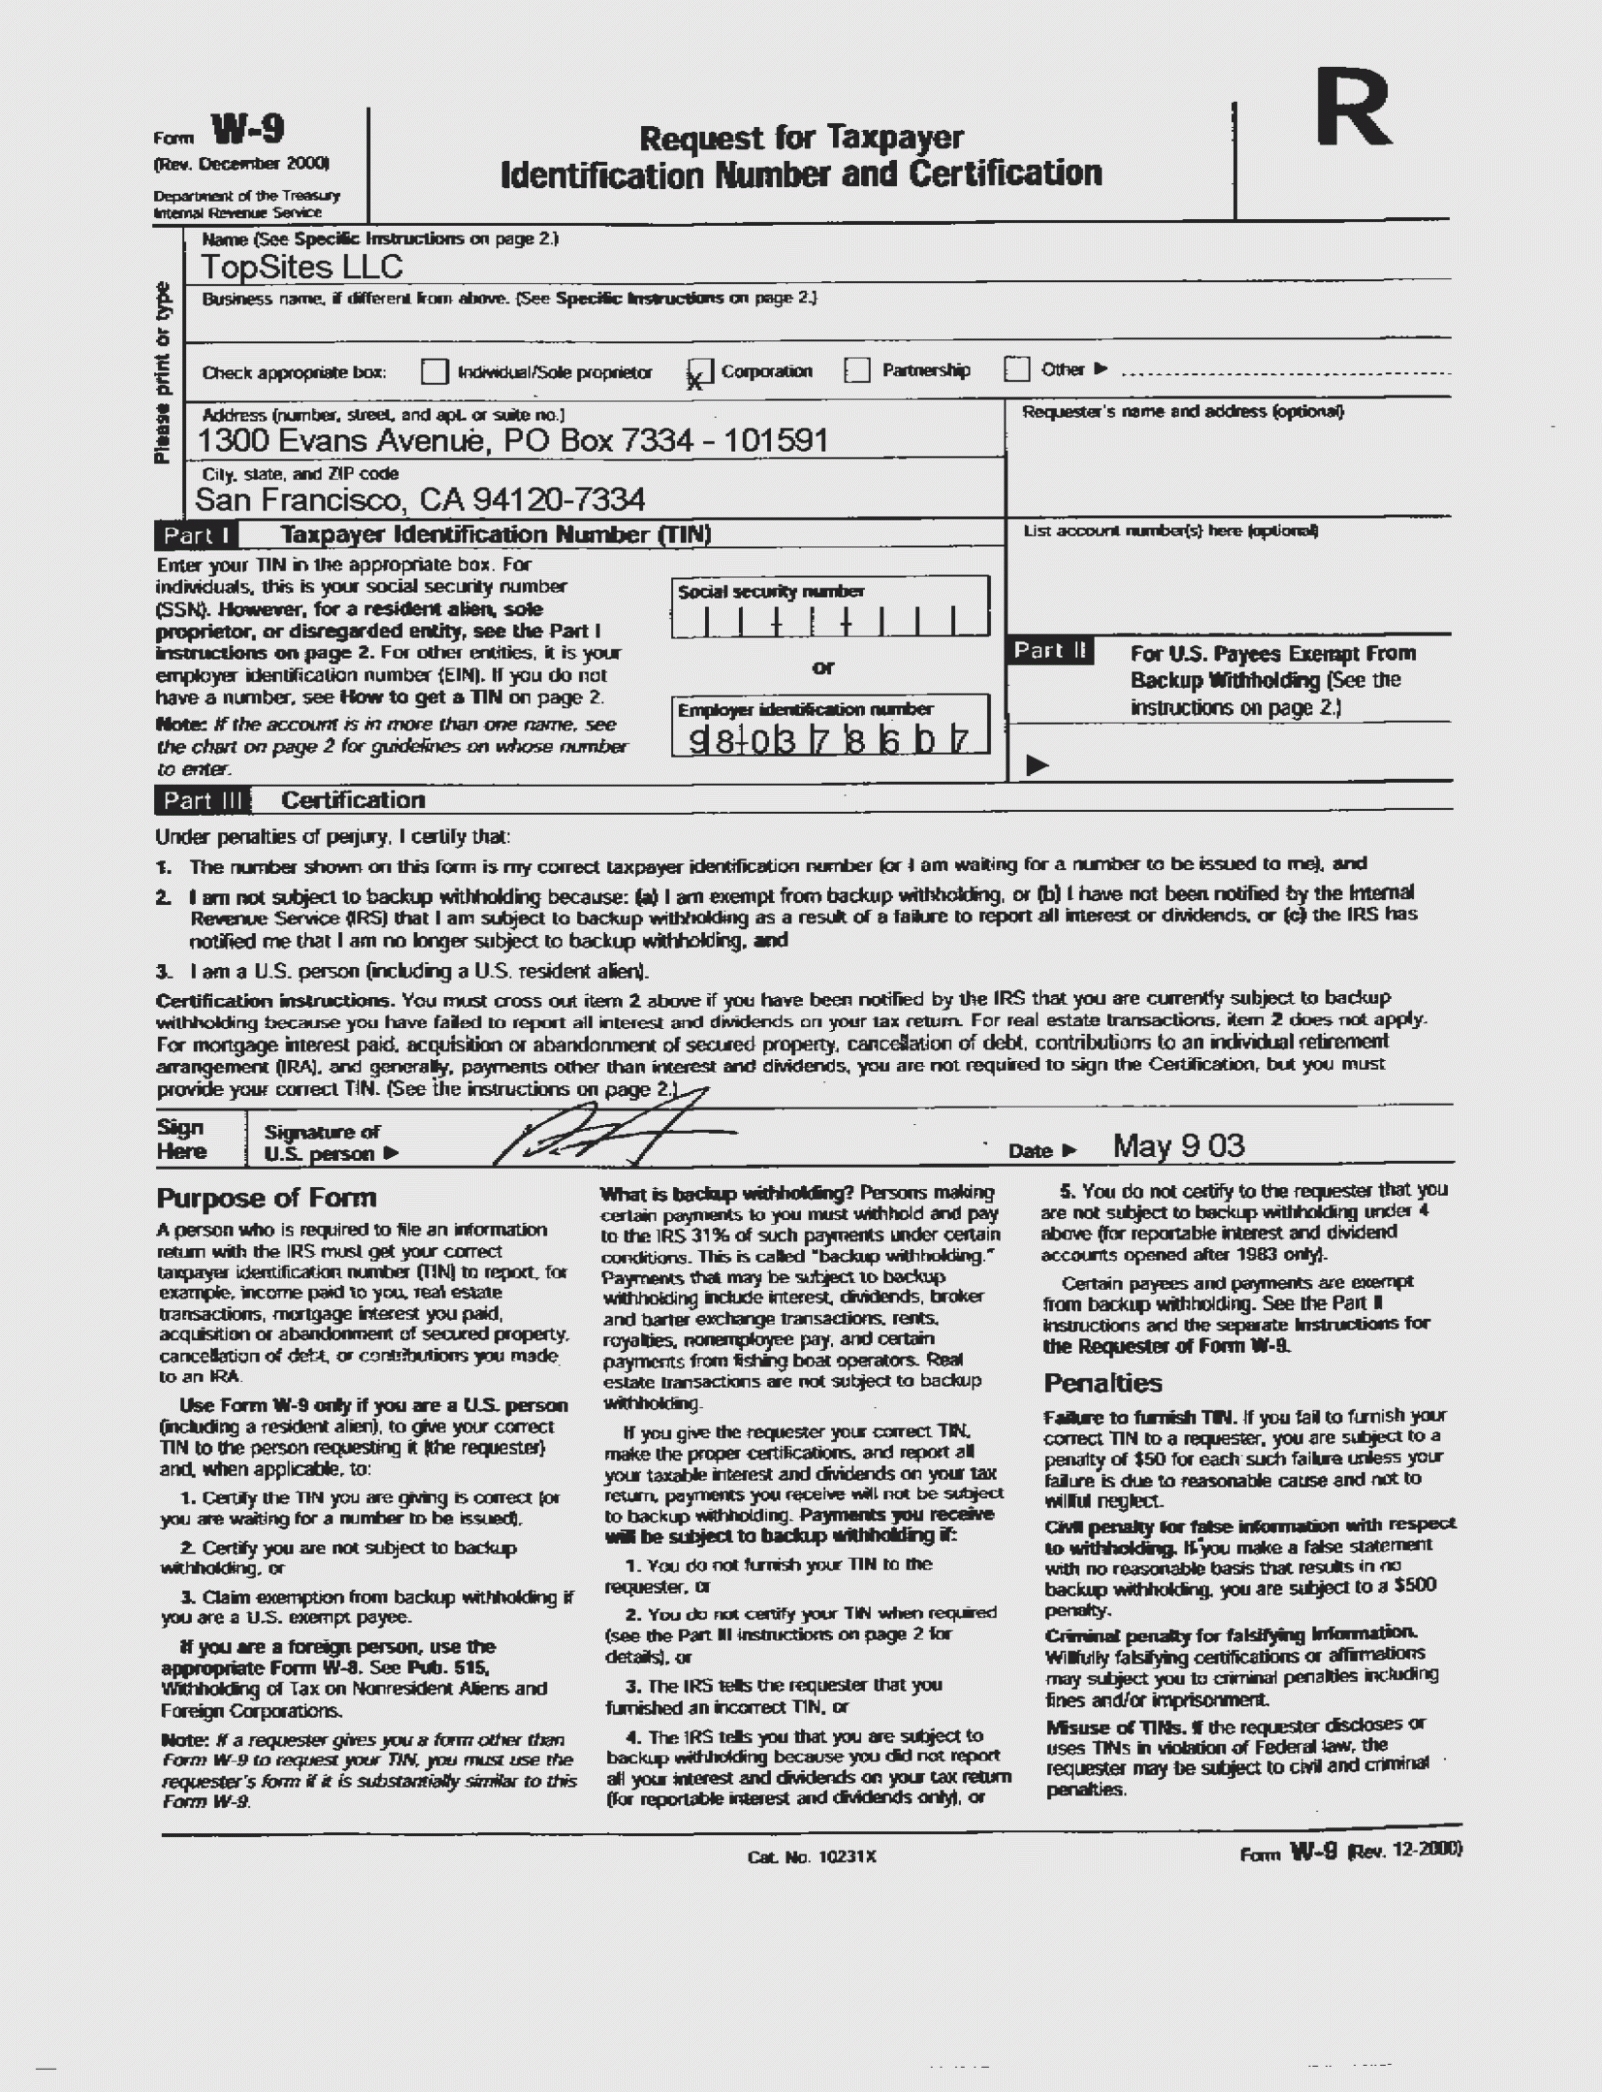 W 9 Form Fillable Printable Irs Template Online 2018 2019-Blank W 9 Forms Printable 2020 Irs